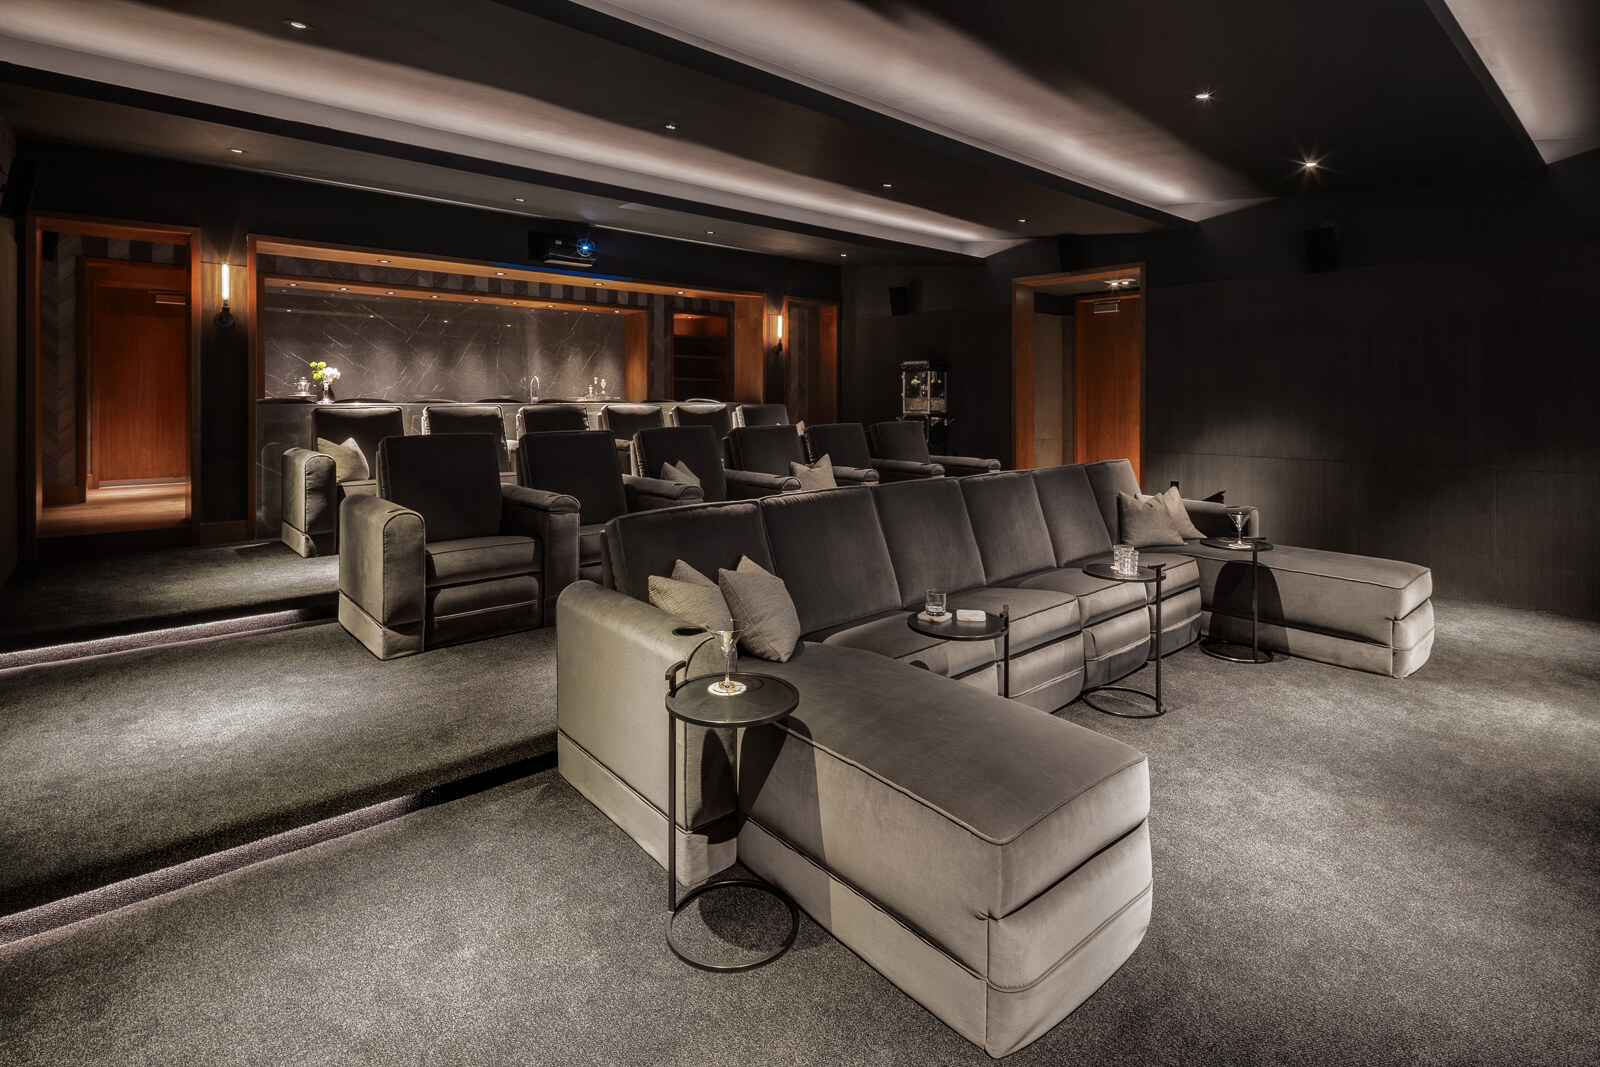 Luxurious home theater with plush seating and sophisticated interior design.